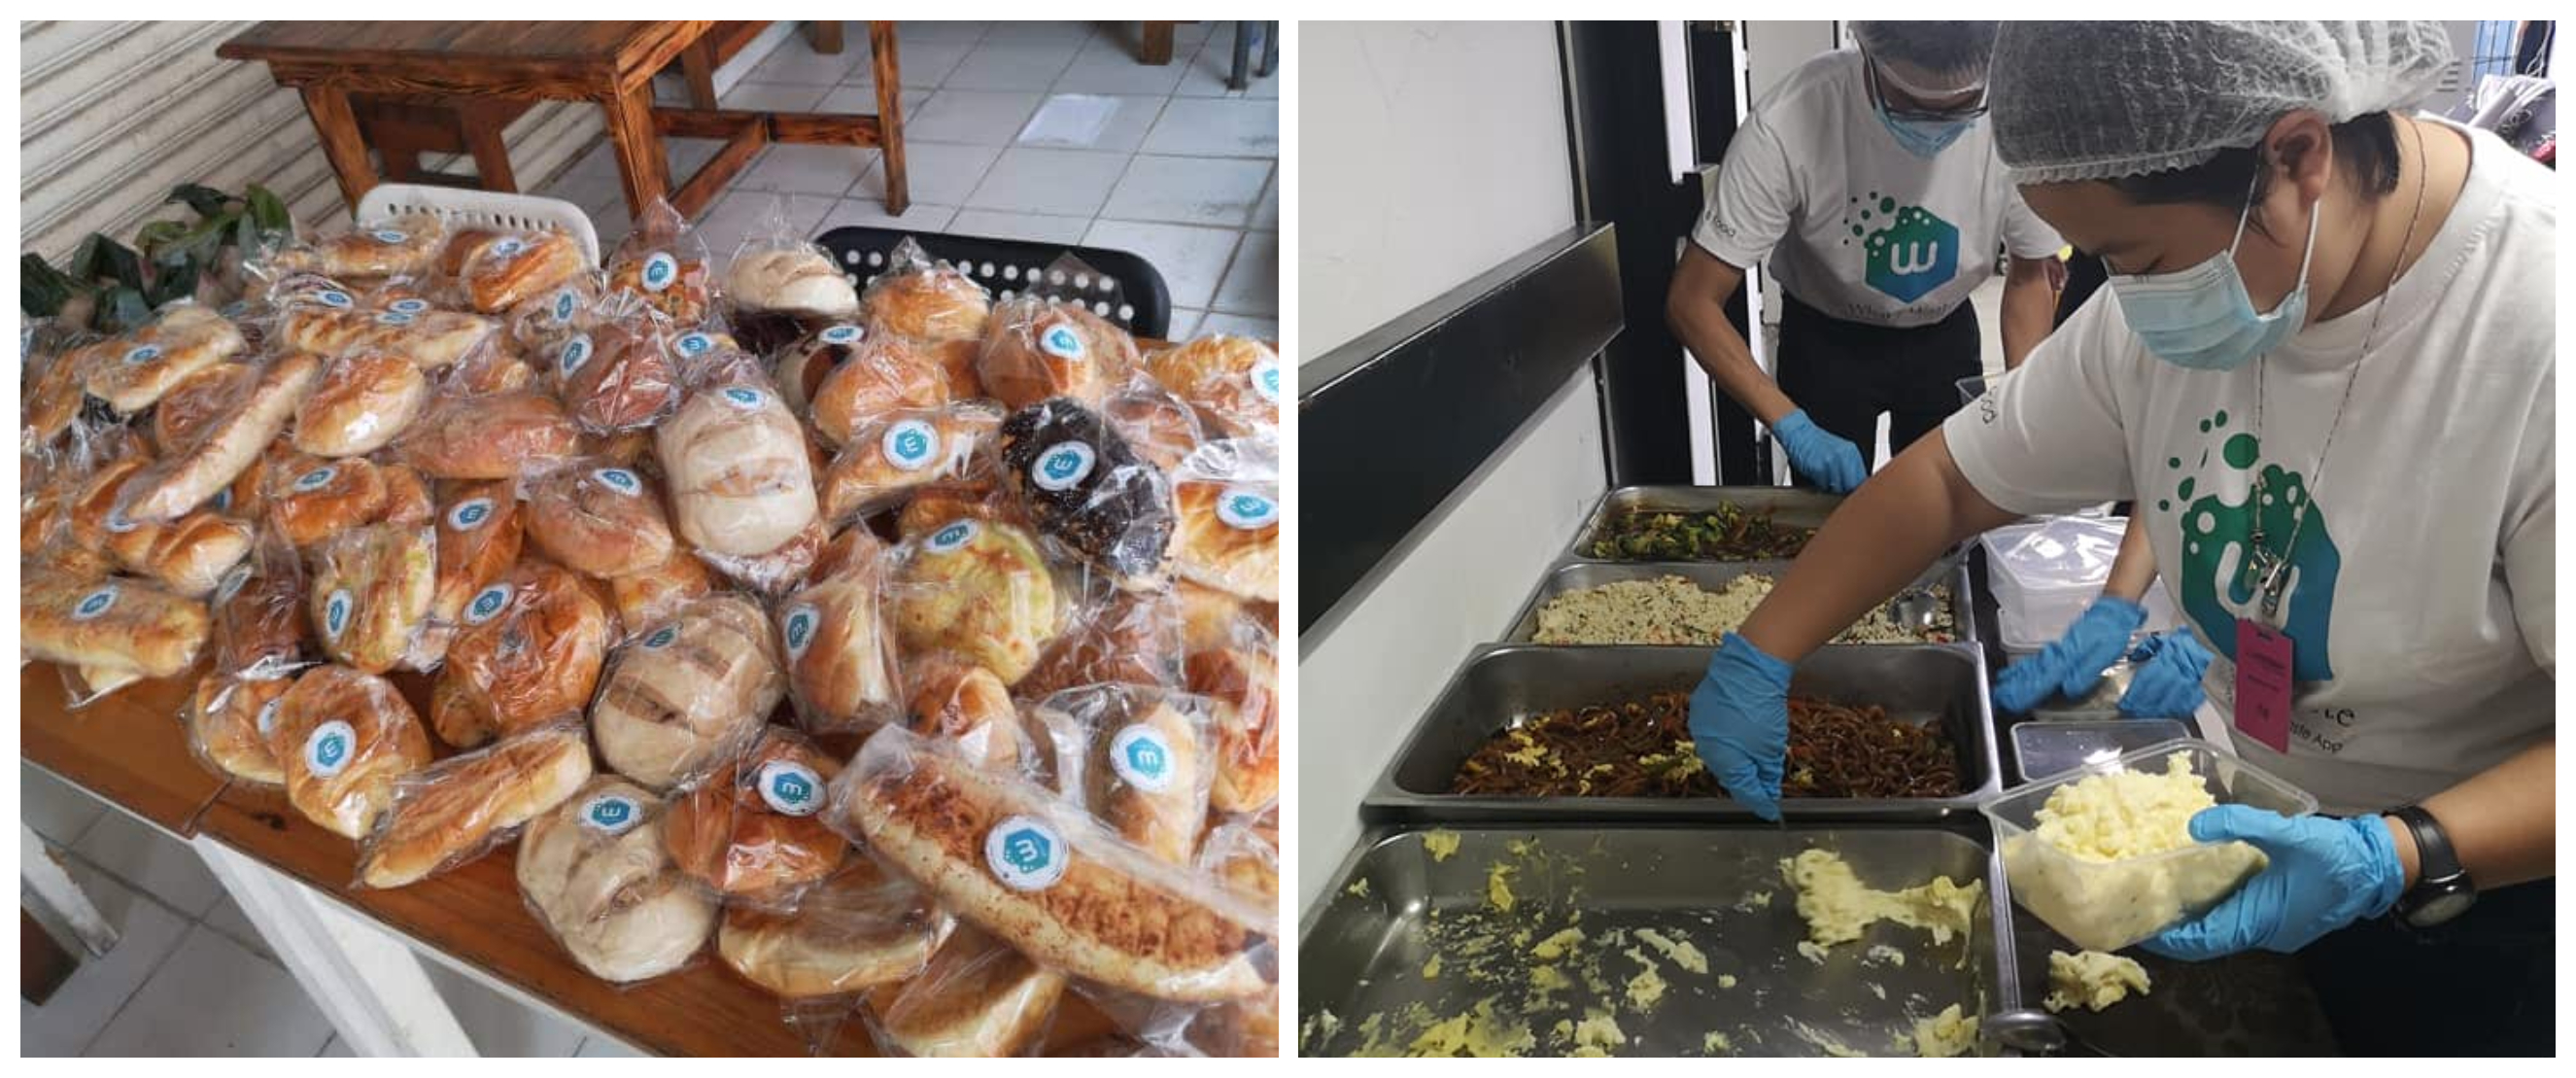 Food rescued from a bakery shop (left) and wedding (right). Images from What A Waste